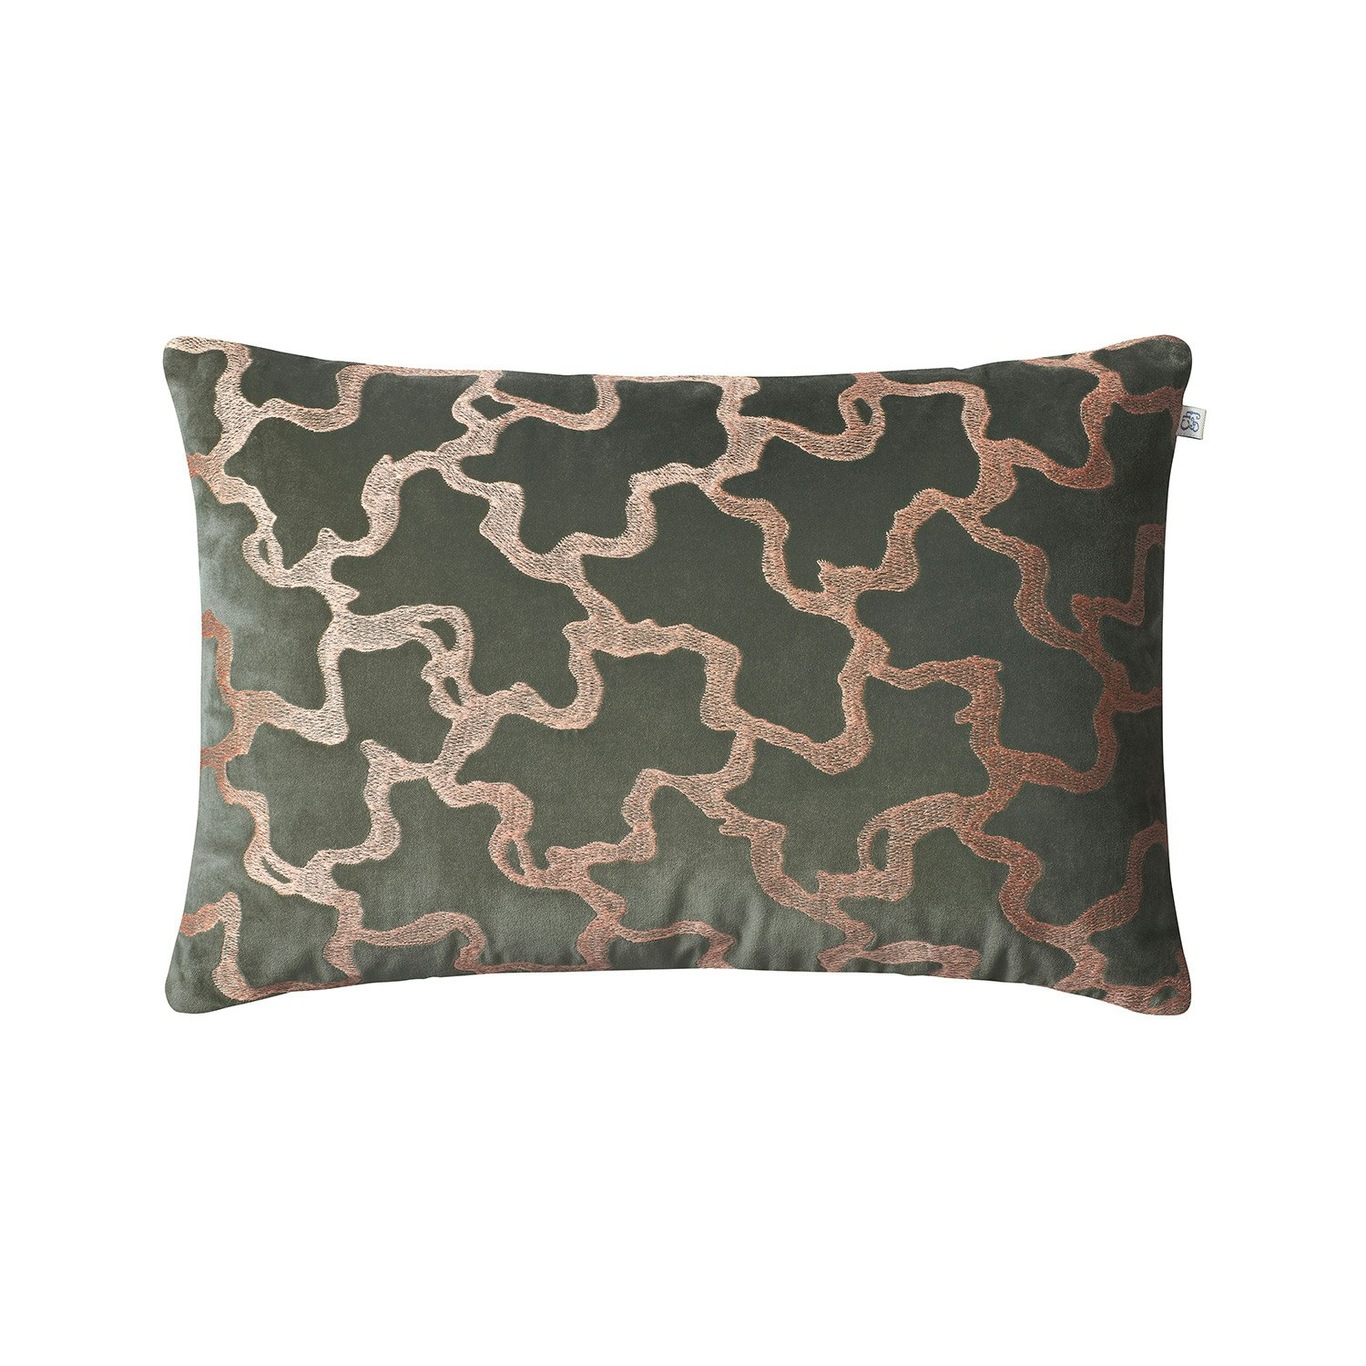 Chand Cushion Cover 40x60 cm, Forest Green / Rose